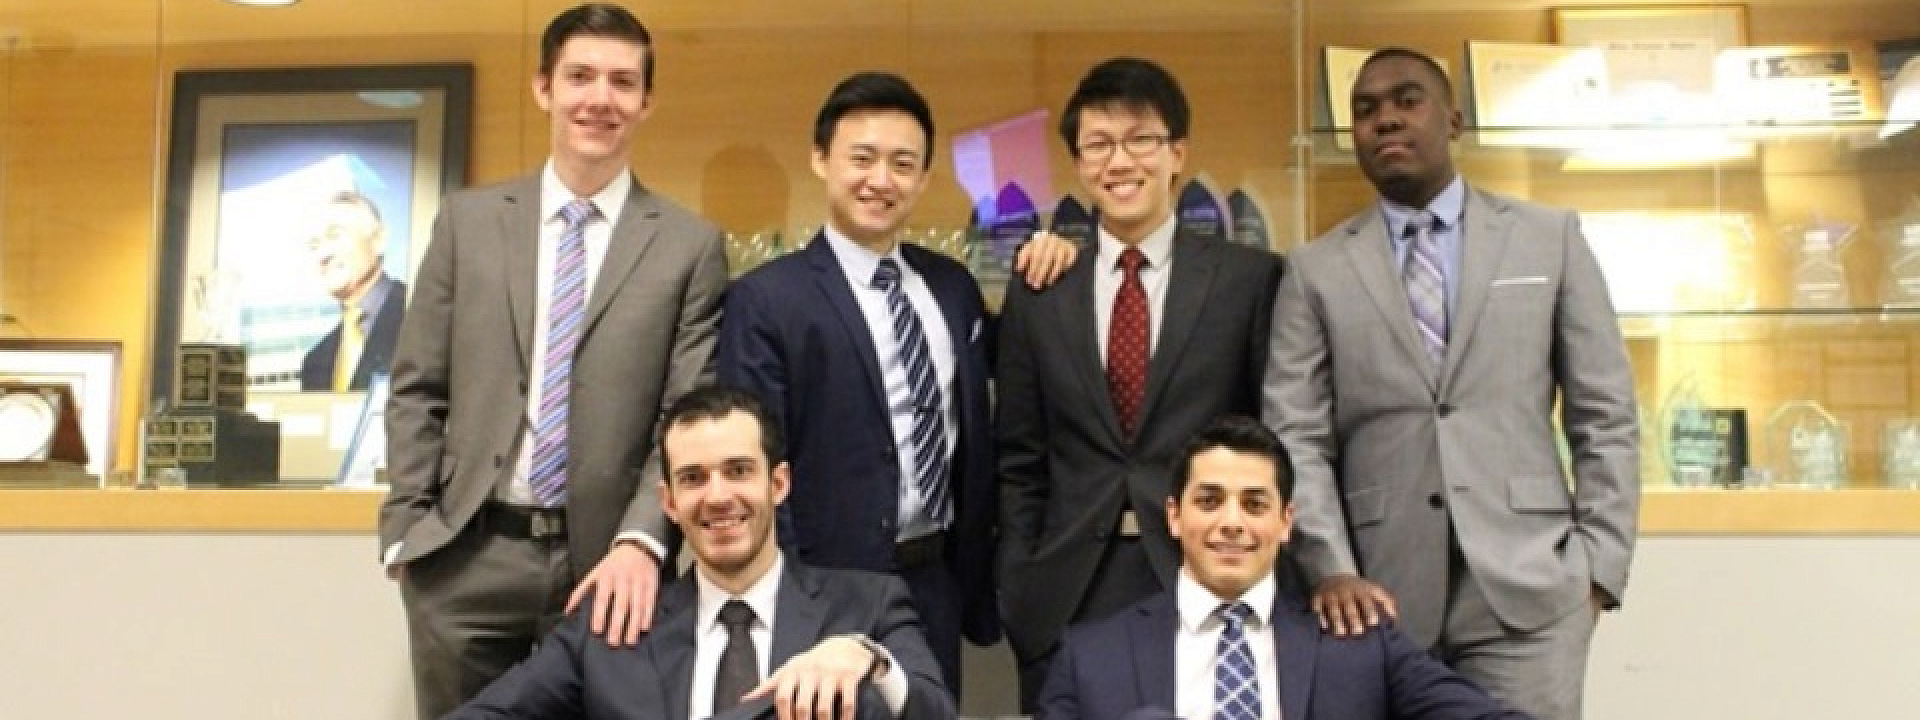 Telfer Performs at World’s Largest Trading Competition in Toronto